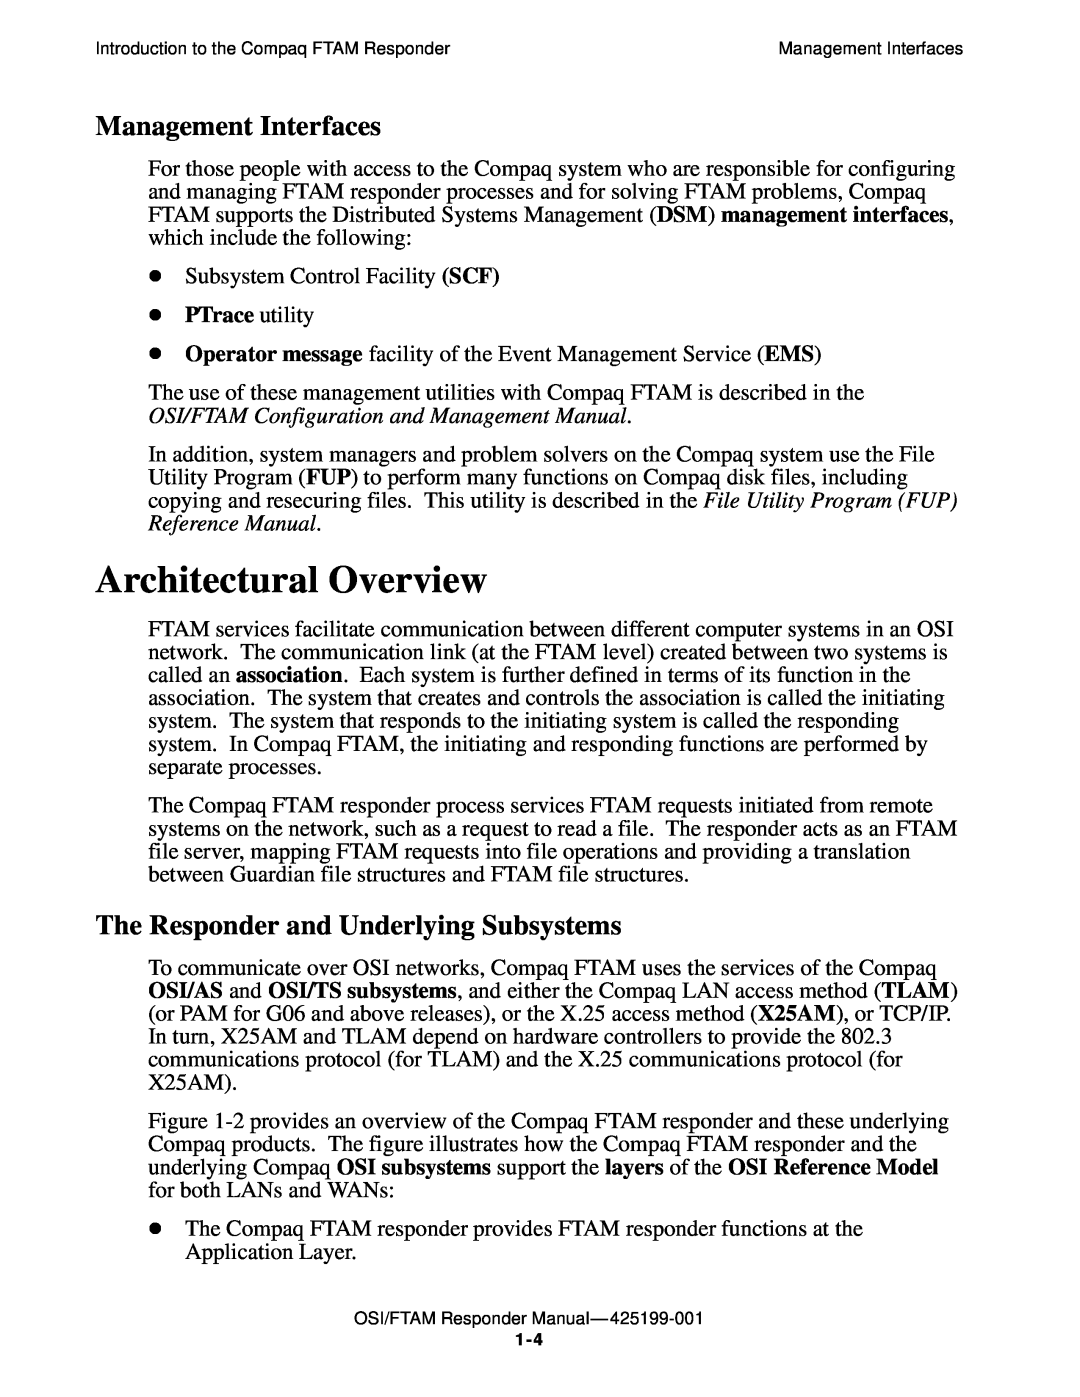 Compaq OSI/APLMGR D43, OSI/FTAM D43 Architectural Overview, Management Interfaces, The Responder and Underlying Subsystems 